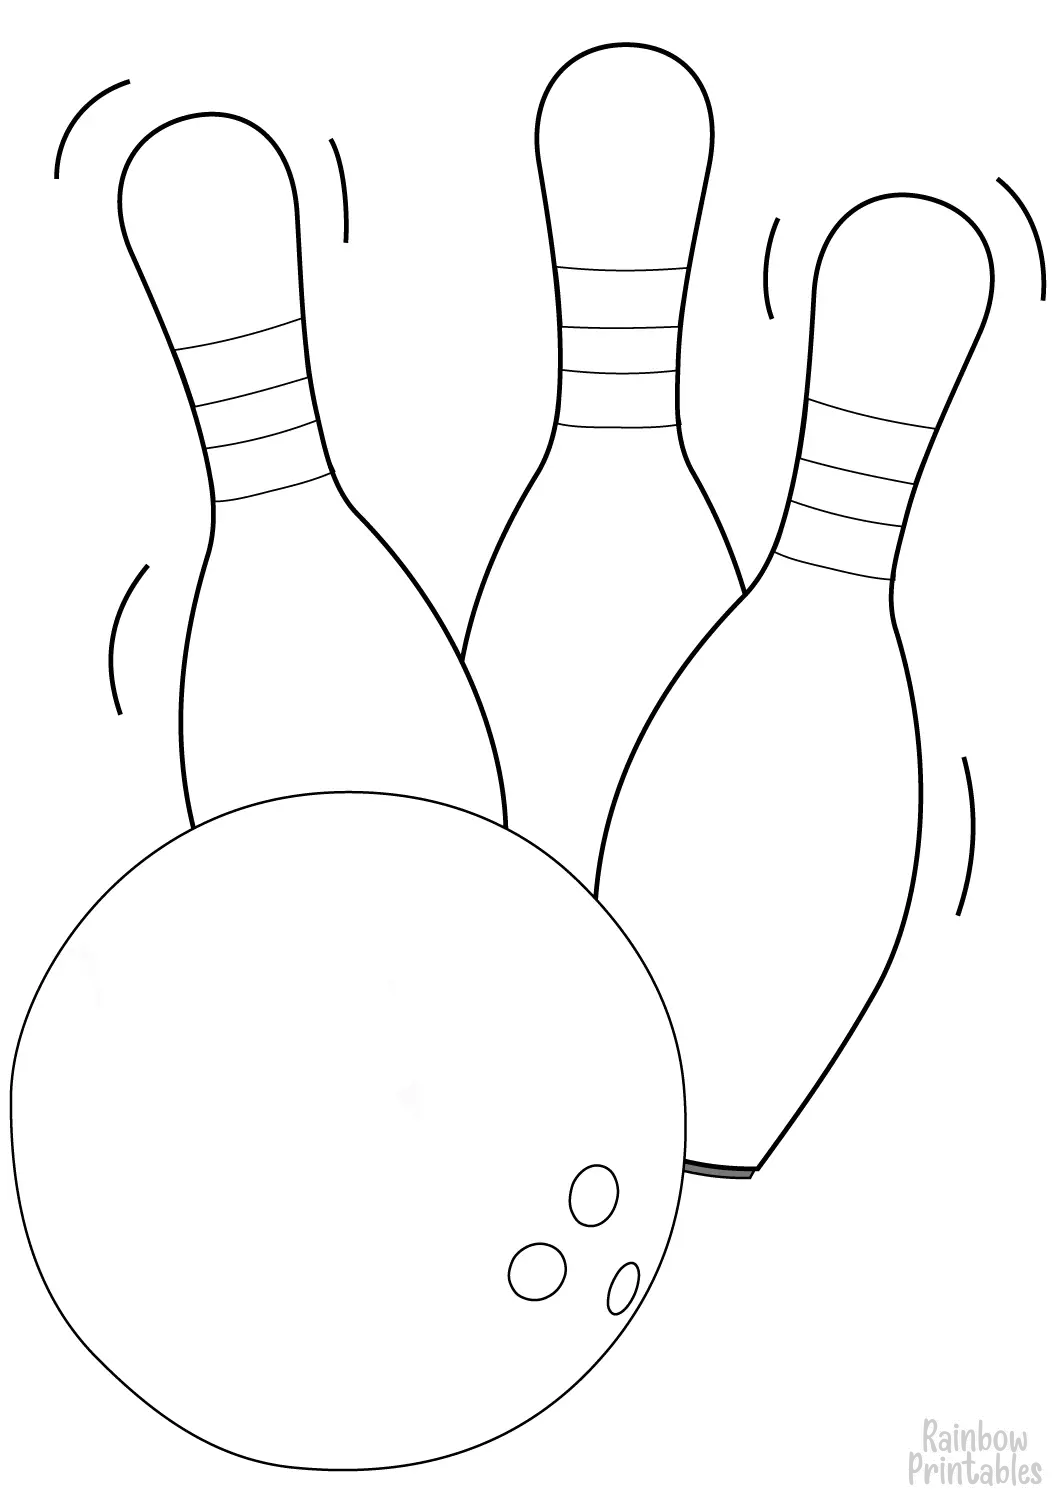 Bowling Strike Ball DAY Clipart Coloring Pages for Kids Adults Art Activities Line Art